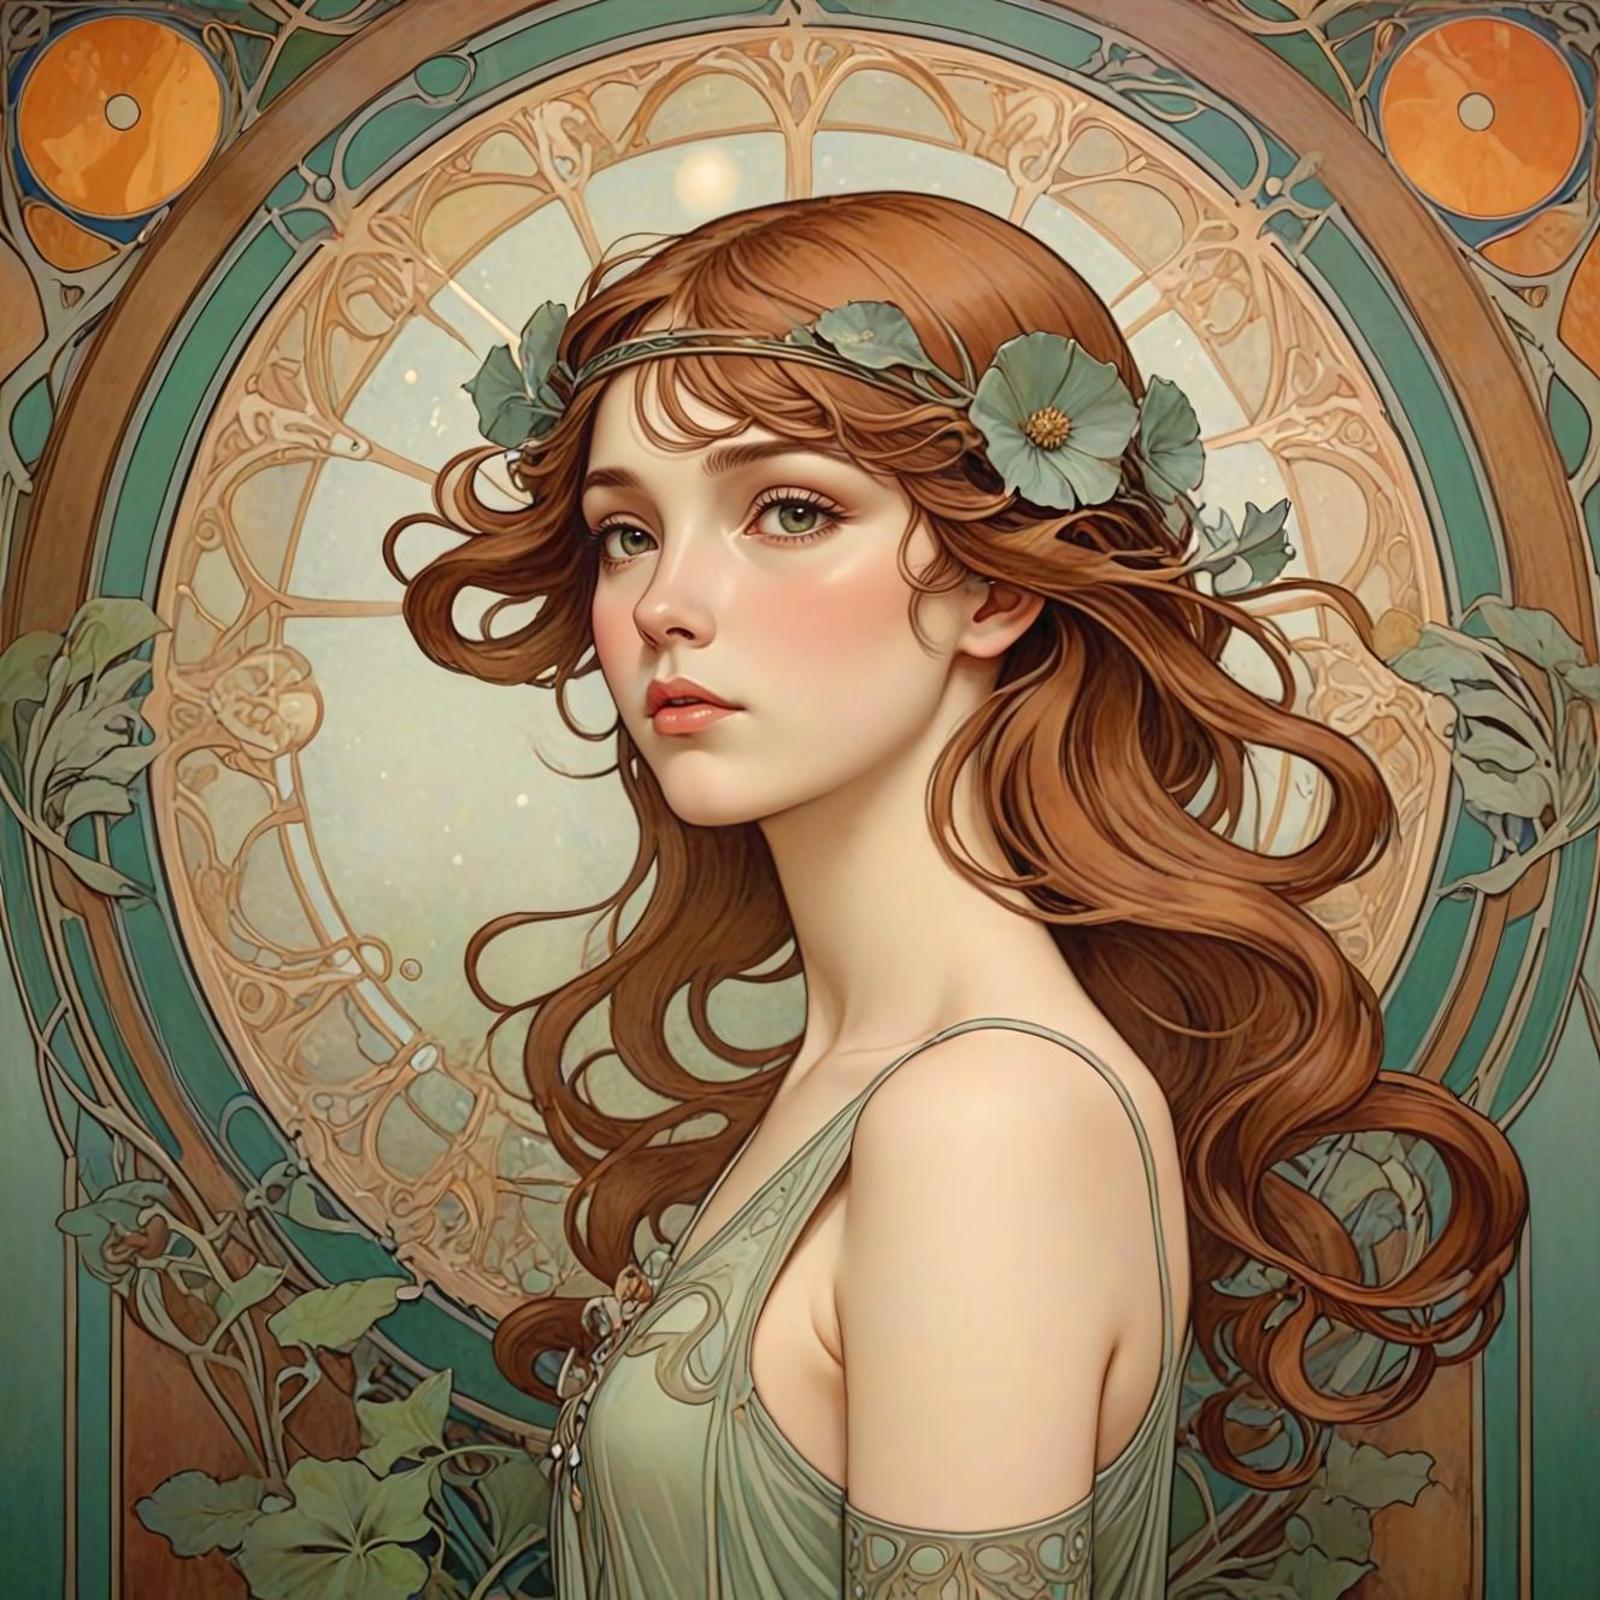 A beautifully illustrated portrait of a woman in a green dress with flowers in her hair.